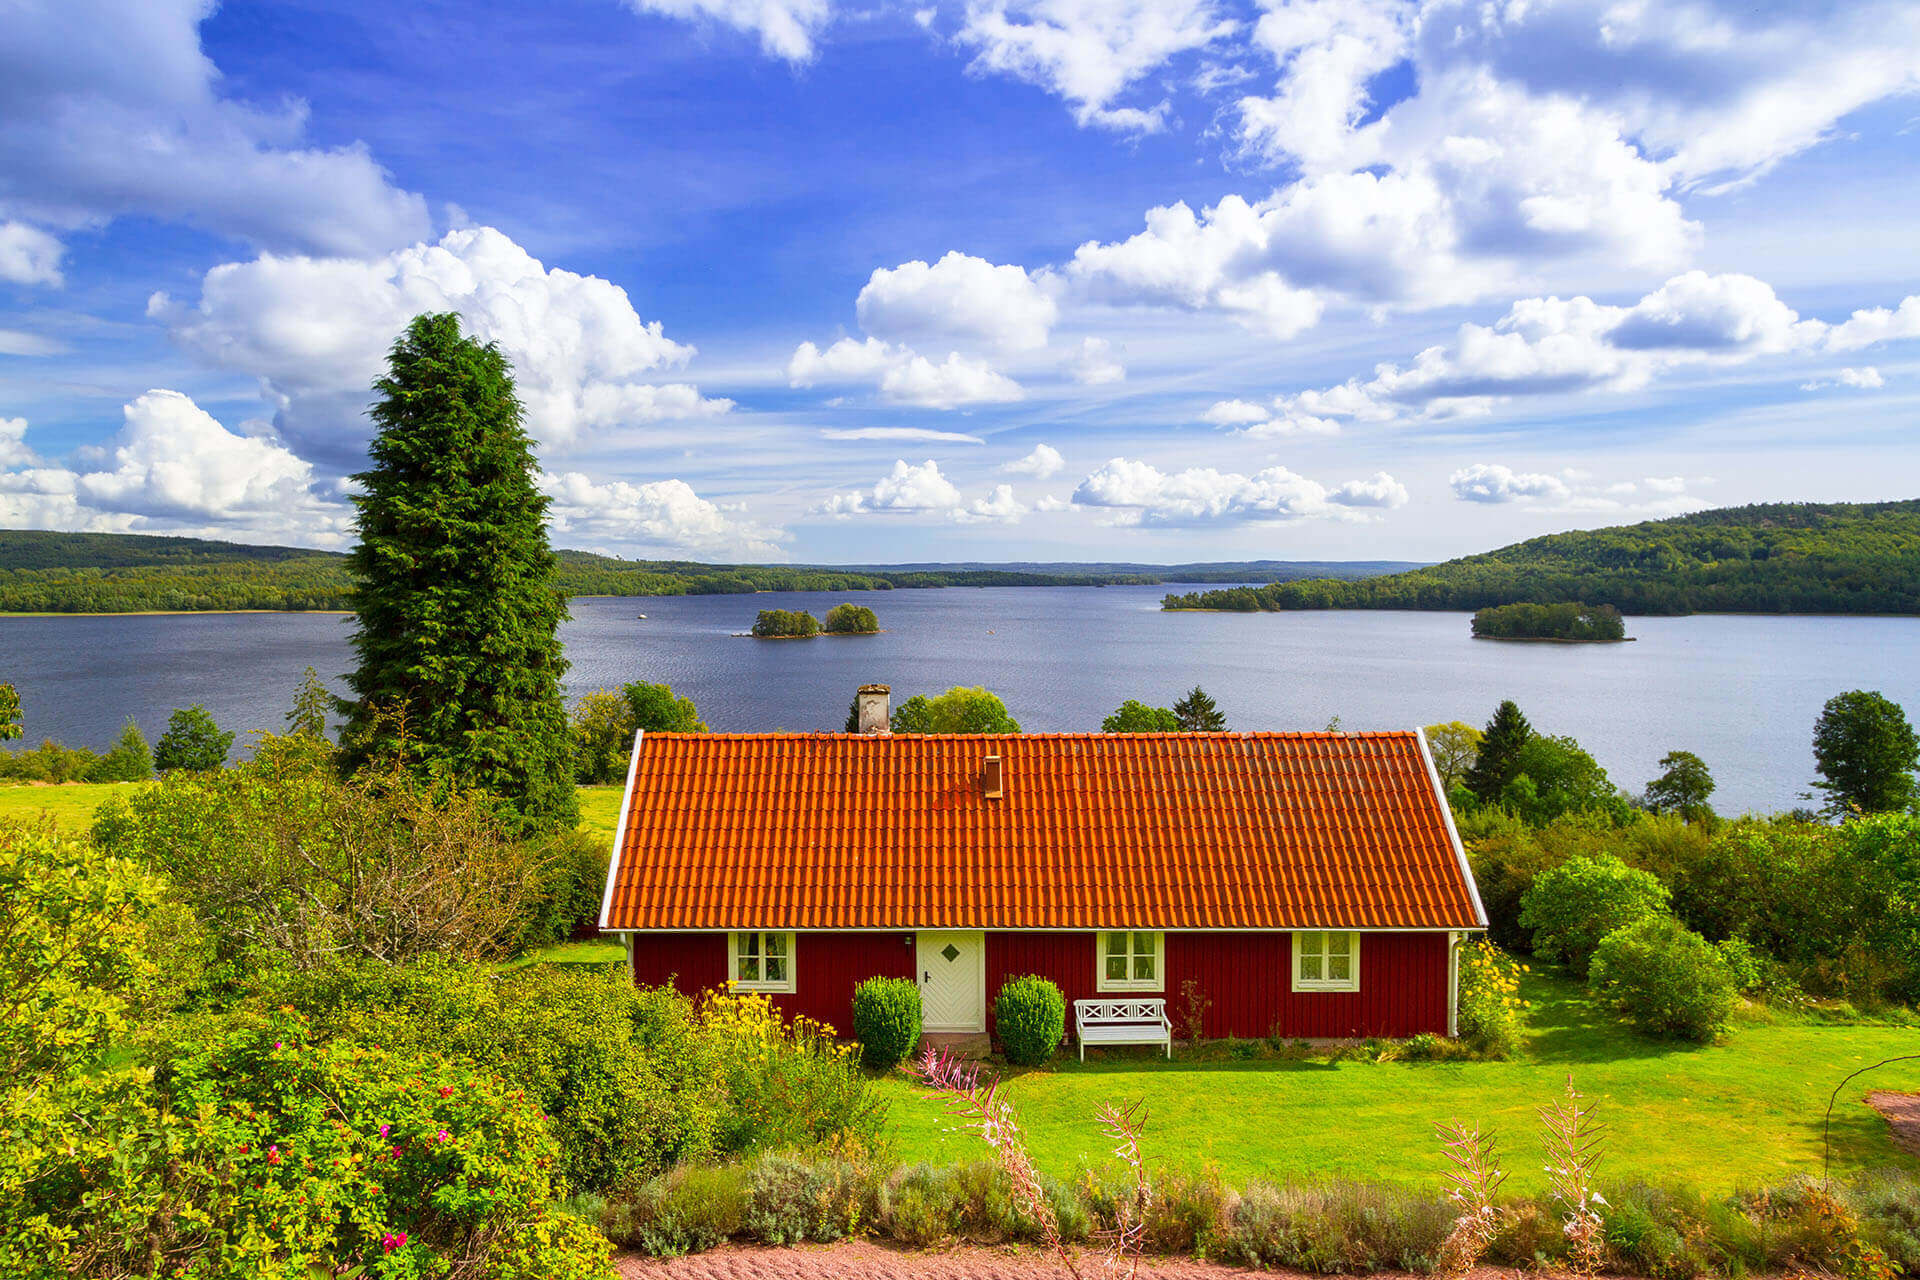 Sweden: New Work Permit Rules, New Entry Visas, & Residence Permits